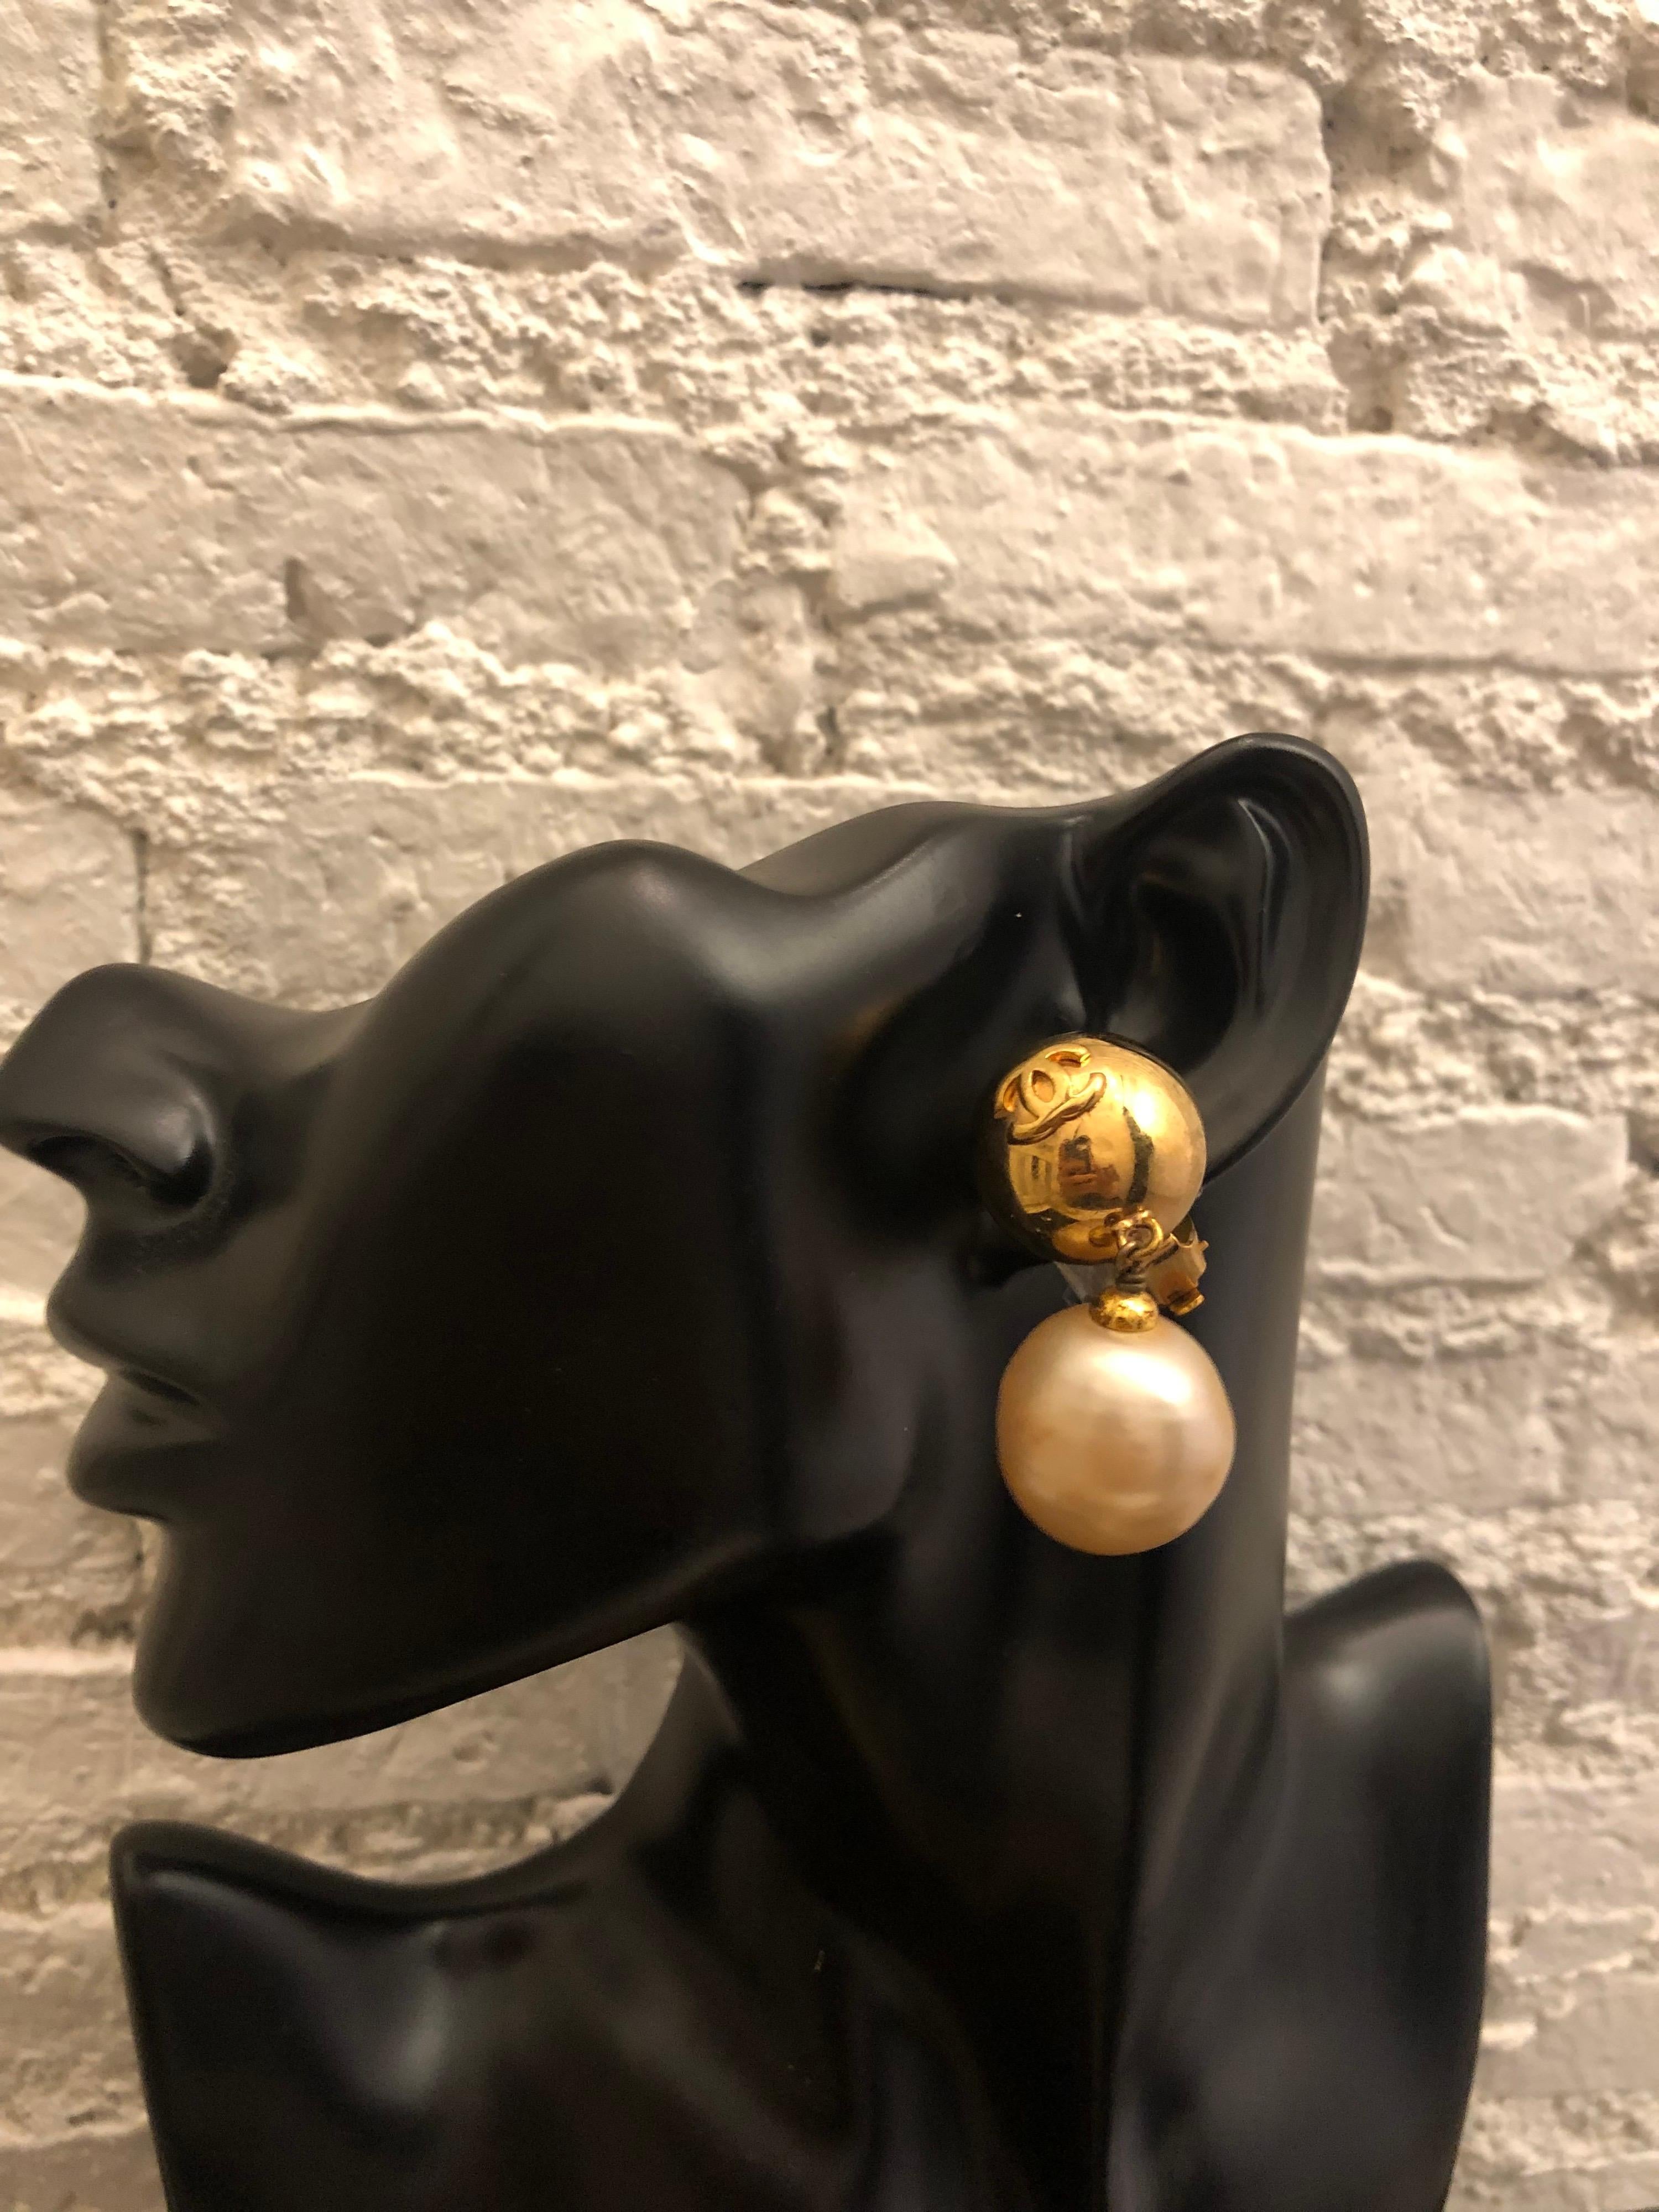 1980s vintage Chanel gold toned earclips featuring gold toned sphere with dangle faux pearl. Stamped Chanel 27 made in France. Measures approximately 5 x 2.5 cm. Comes with box. 

Condition: Minor signs of wear with minor scratches and tarnish